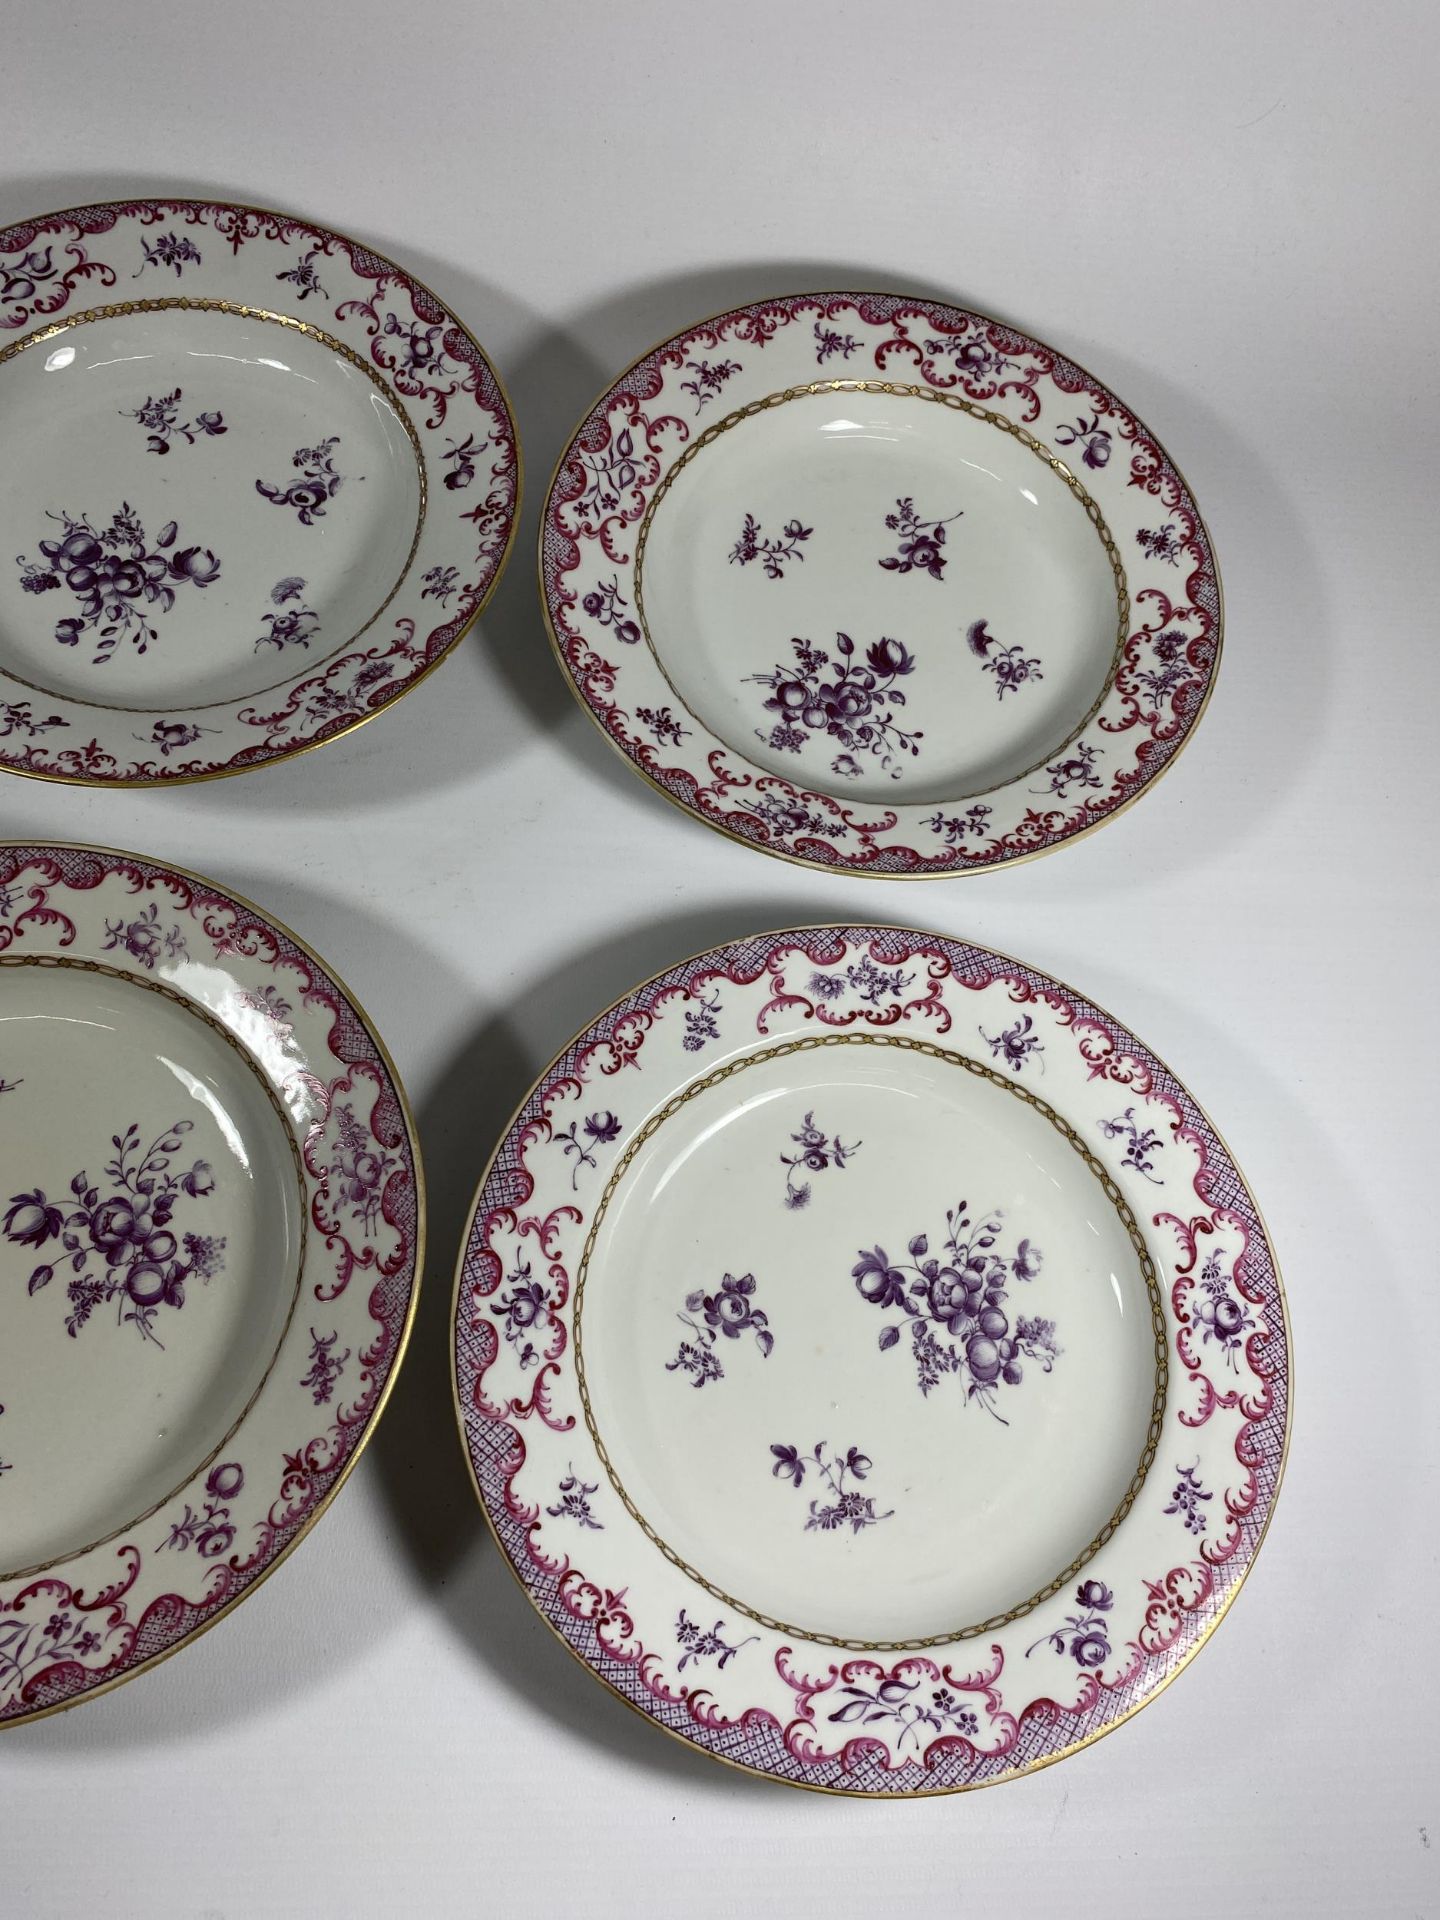 A SET OF SIX EARLY-MID 19TH CENTURY PORCELAIN HAND PAINTED DISHES, UNMARKED, DIAMETER 23CM - Image 4 of 5